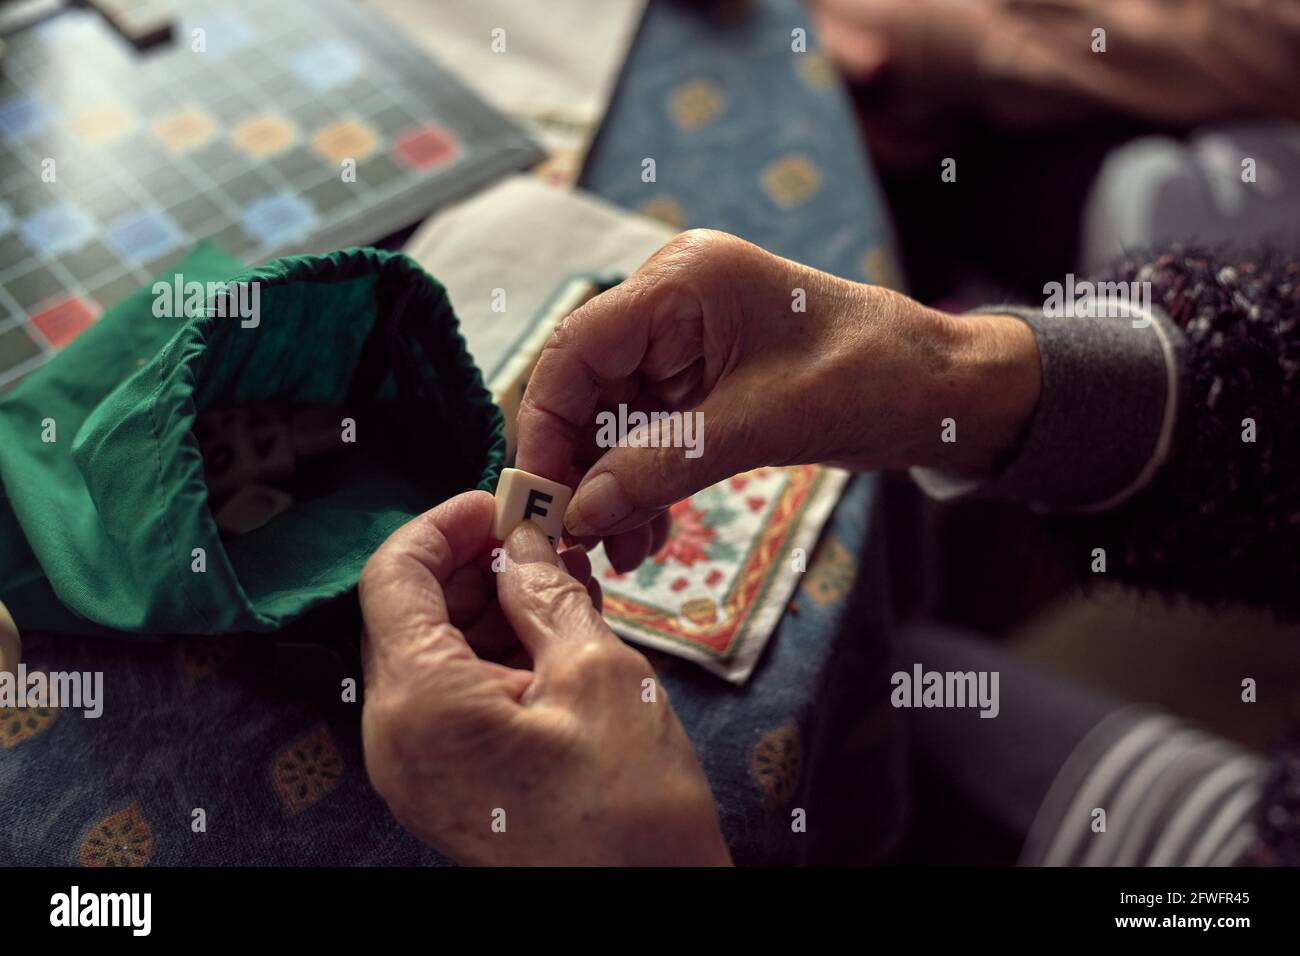 Mature hands with arthritis, playing letters game Stock Photo